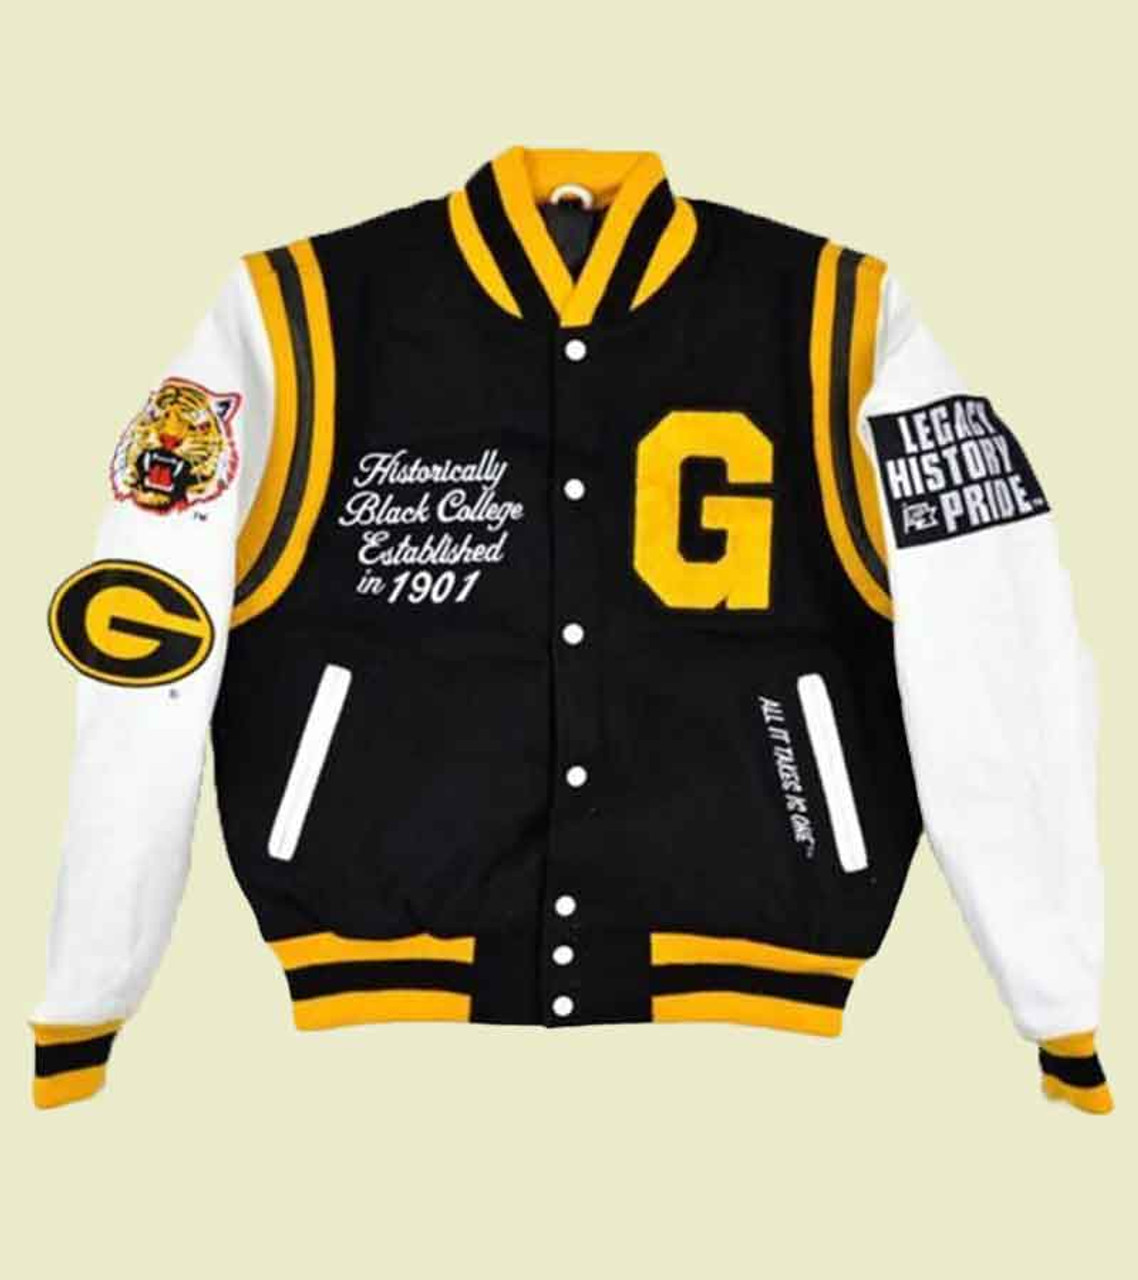 Men's College Black and Yellow Bomber Jacket - Jackets Creator